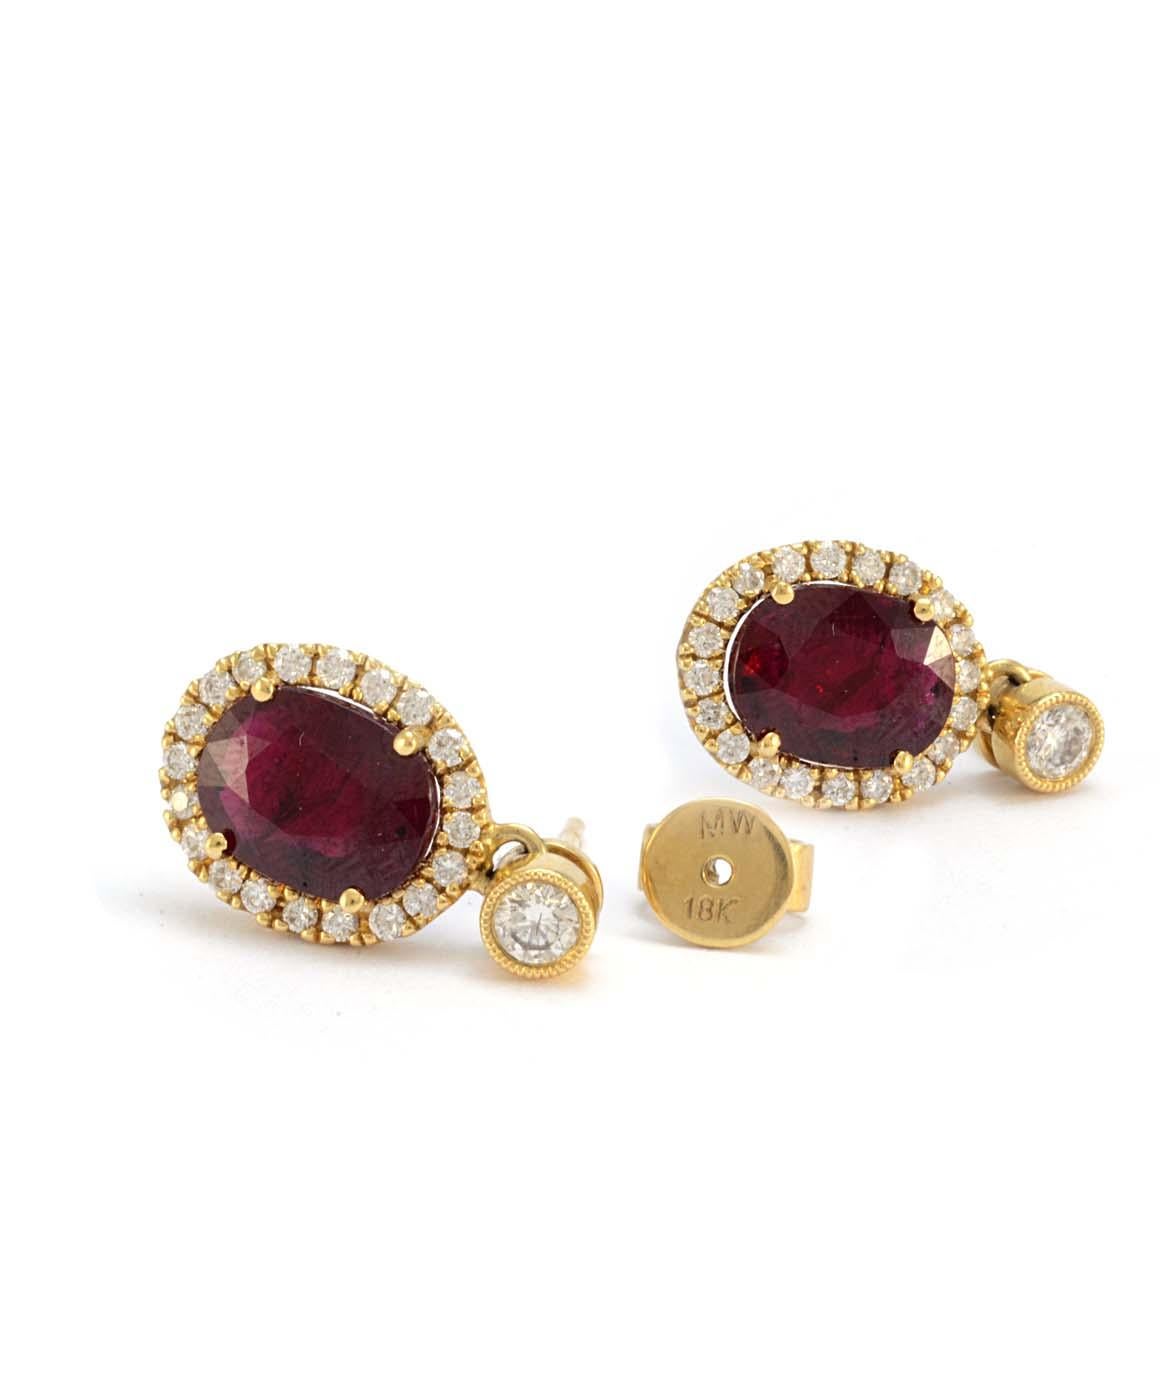 Excellent Condition. Each earring features an oval ruby measuring approximately 9.90mm X 6.67 surrounded by a halo of 20 diamonds weighing approximately 0.20cttw each. (0.40cttw total) Above each halo is a bezel set diamond weighing approximately